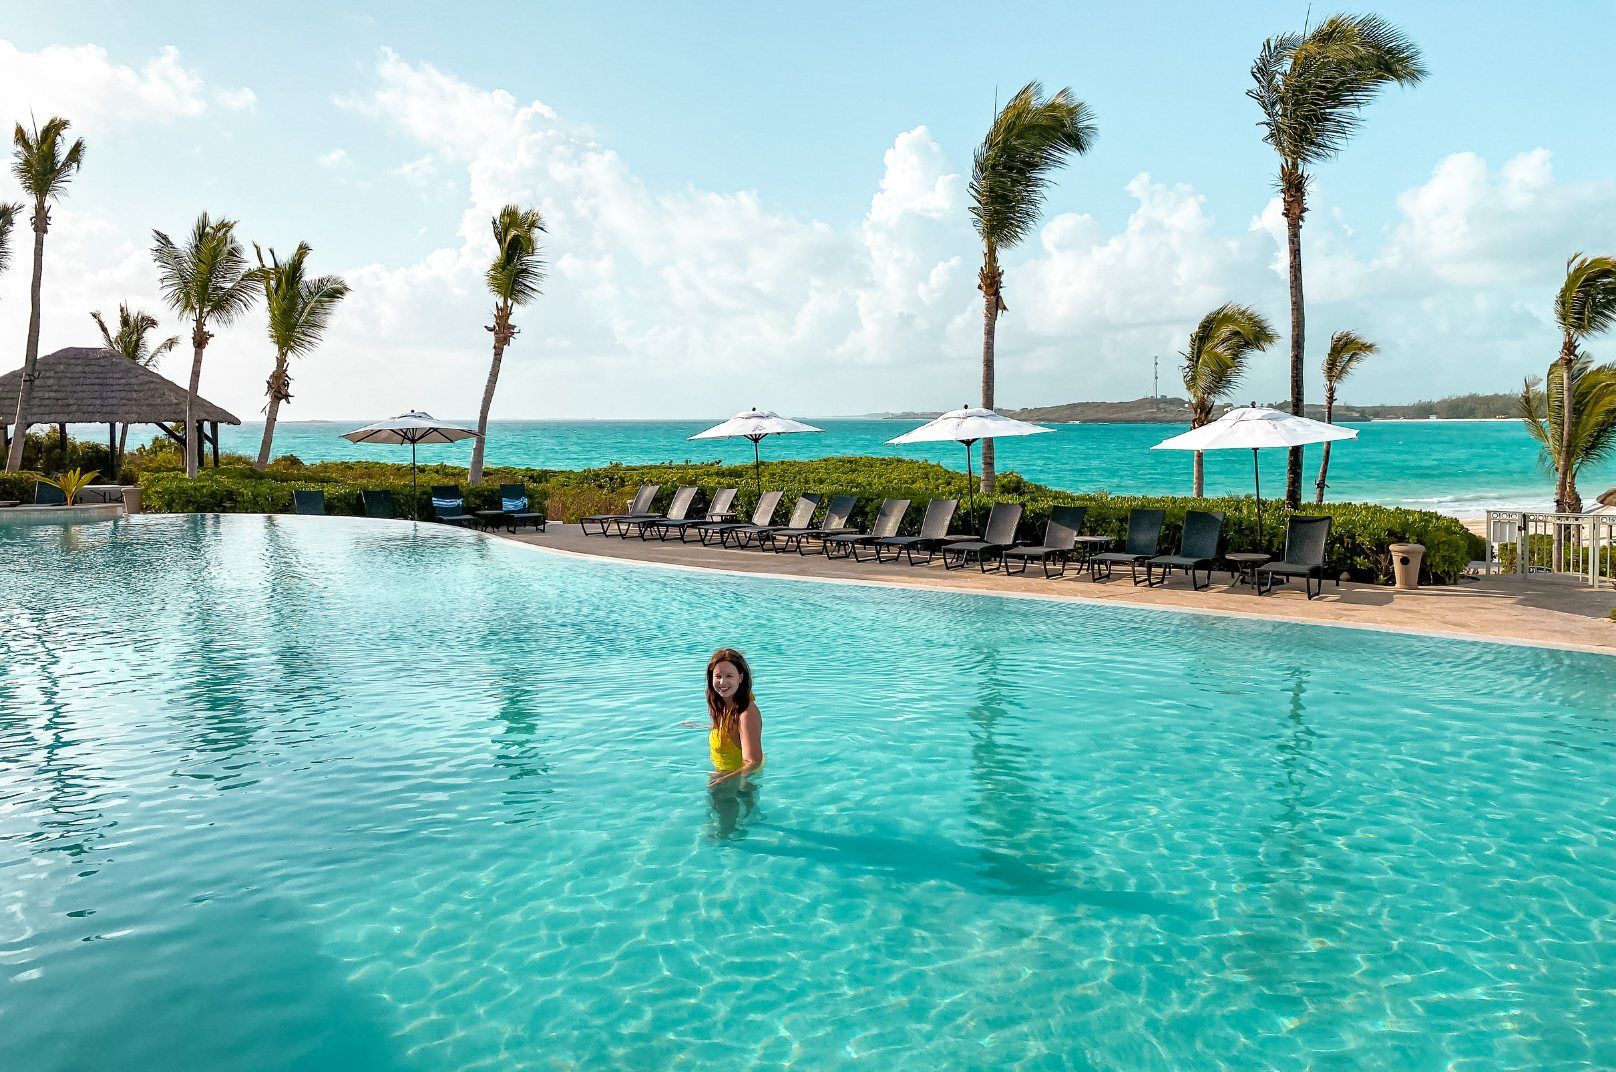 The best hotels in The Bahamas